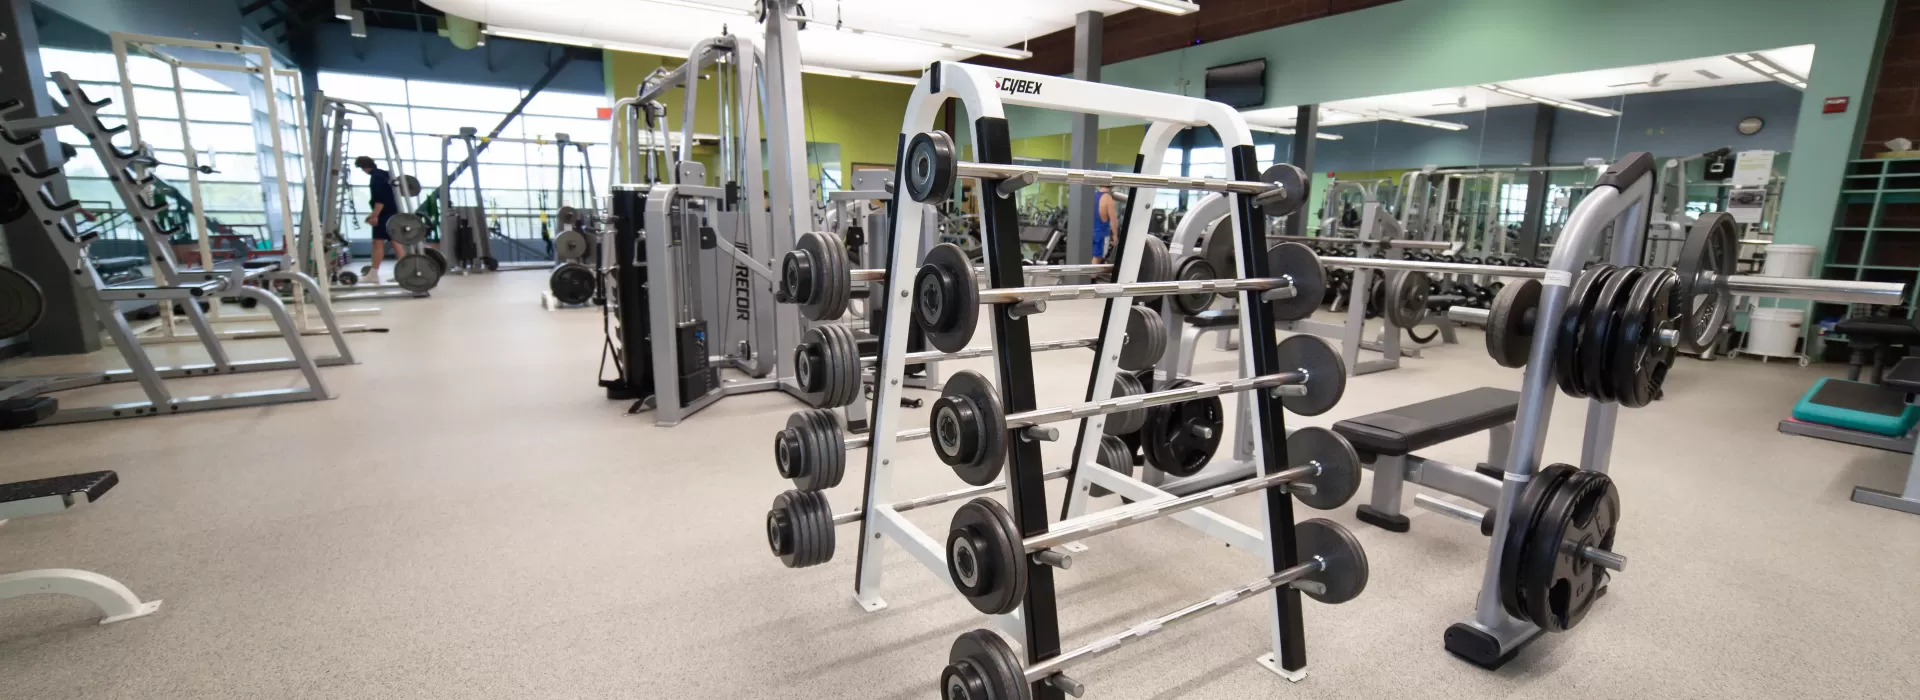 Low-Cost Fitness: Greenwood Community Center Fitness Center